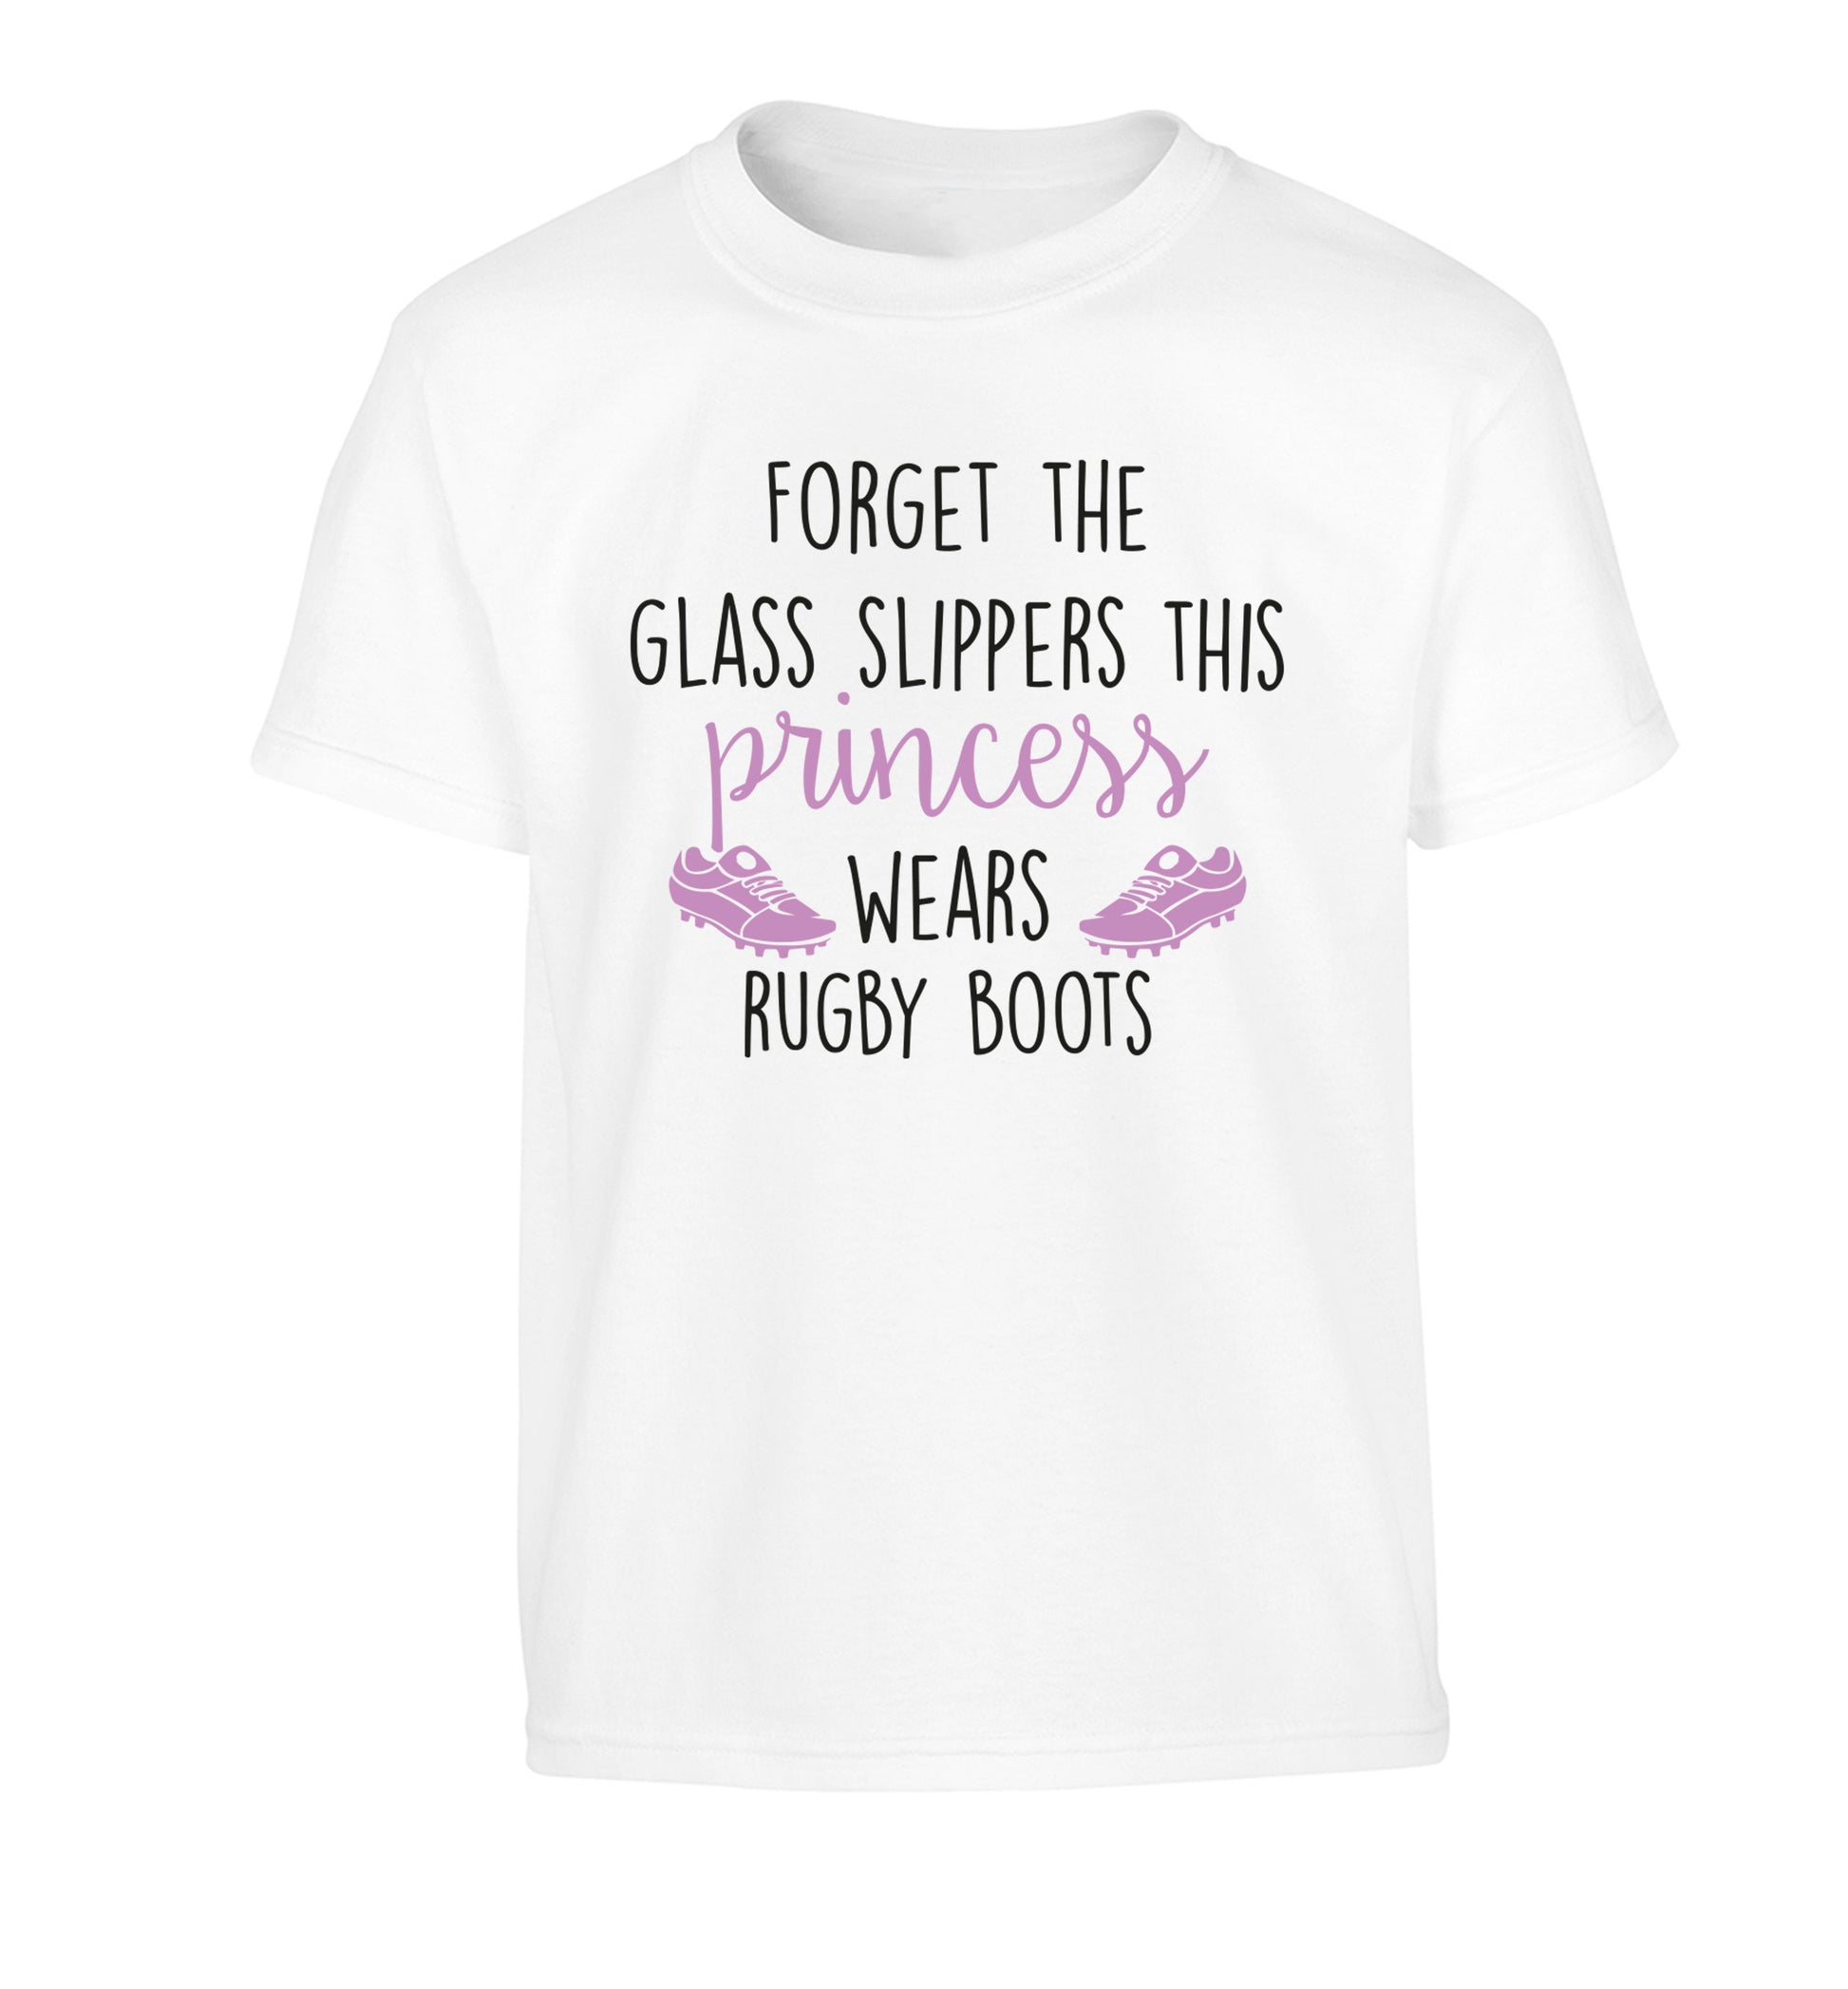 Forget the glass slippers this princess wears rugby boots Children's white Tshirt 12-14 Years